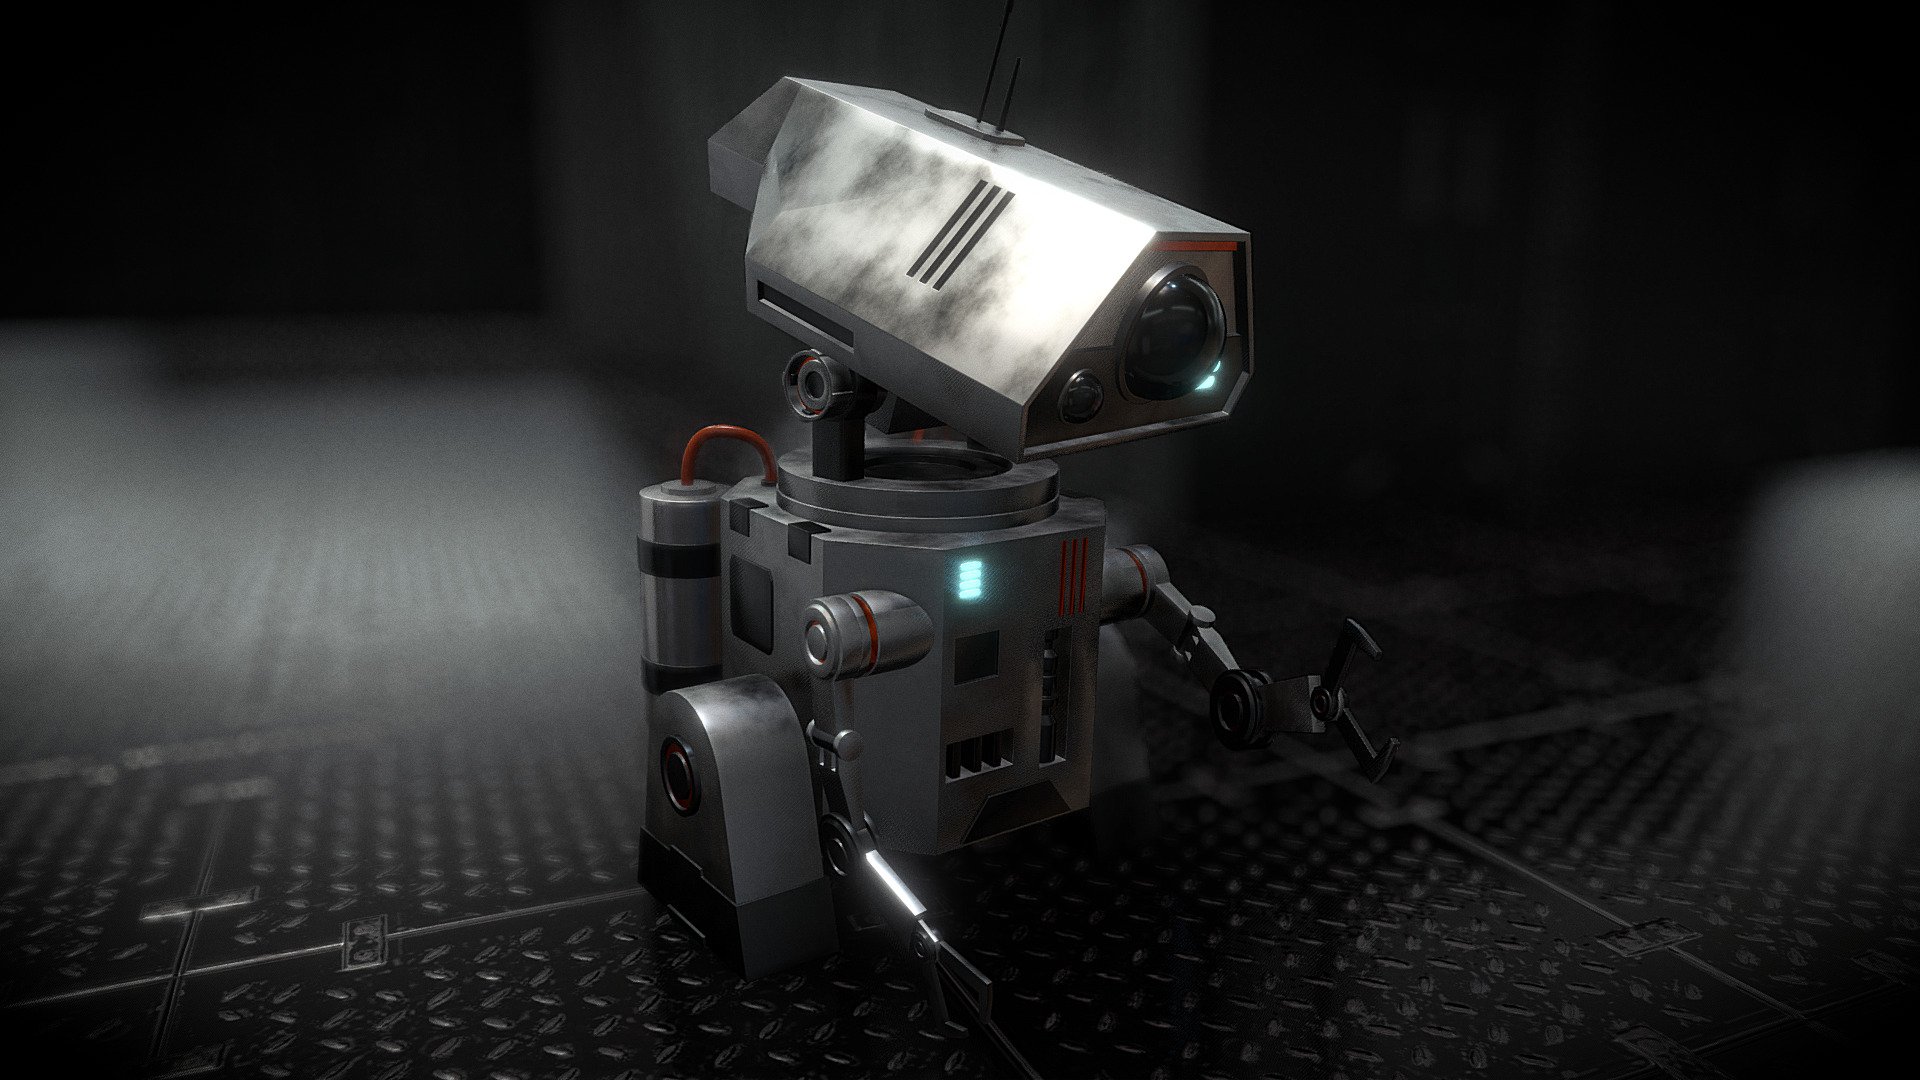 Watch The Tutorial: https://youtu.be/9LMEUXPxl8g

A Sci-Fi Worker Robot character, created with Blender and rendered in Eevee. This model will also look great in the Cycles render engine.

This is the tutorial result of my Sci-Fi Worker Robot character. The robots materials are using a mix of some procedural nodes, and some textures. The model is not rigged with bones, it is mechanically rigged, using the object origins, parenting objects, and using object transform locking. See the product video for more info.

Note: When purchased, you will get two different versions of the robot: The tutorial result, and the other version I created before filming the tutorial.

Content:


Worker Robot Blender Files (Tutorial and Other Result)
Worker Robot Blender Files (With Animations)
Final Renders
Final Animation Videos
Sci-Fi Wall Textures
Sci-Fi Floor Textures
Voltage Texture
Radioactivity Texture
HDRI Lighting
4 Robot Sound Effects (used in animation)
 - Sci-Fi Worker Robot - Buy Royalty Free 3D model by Ryan King Art (@ryankingart) 3d model